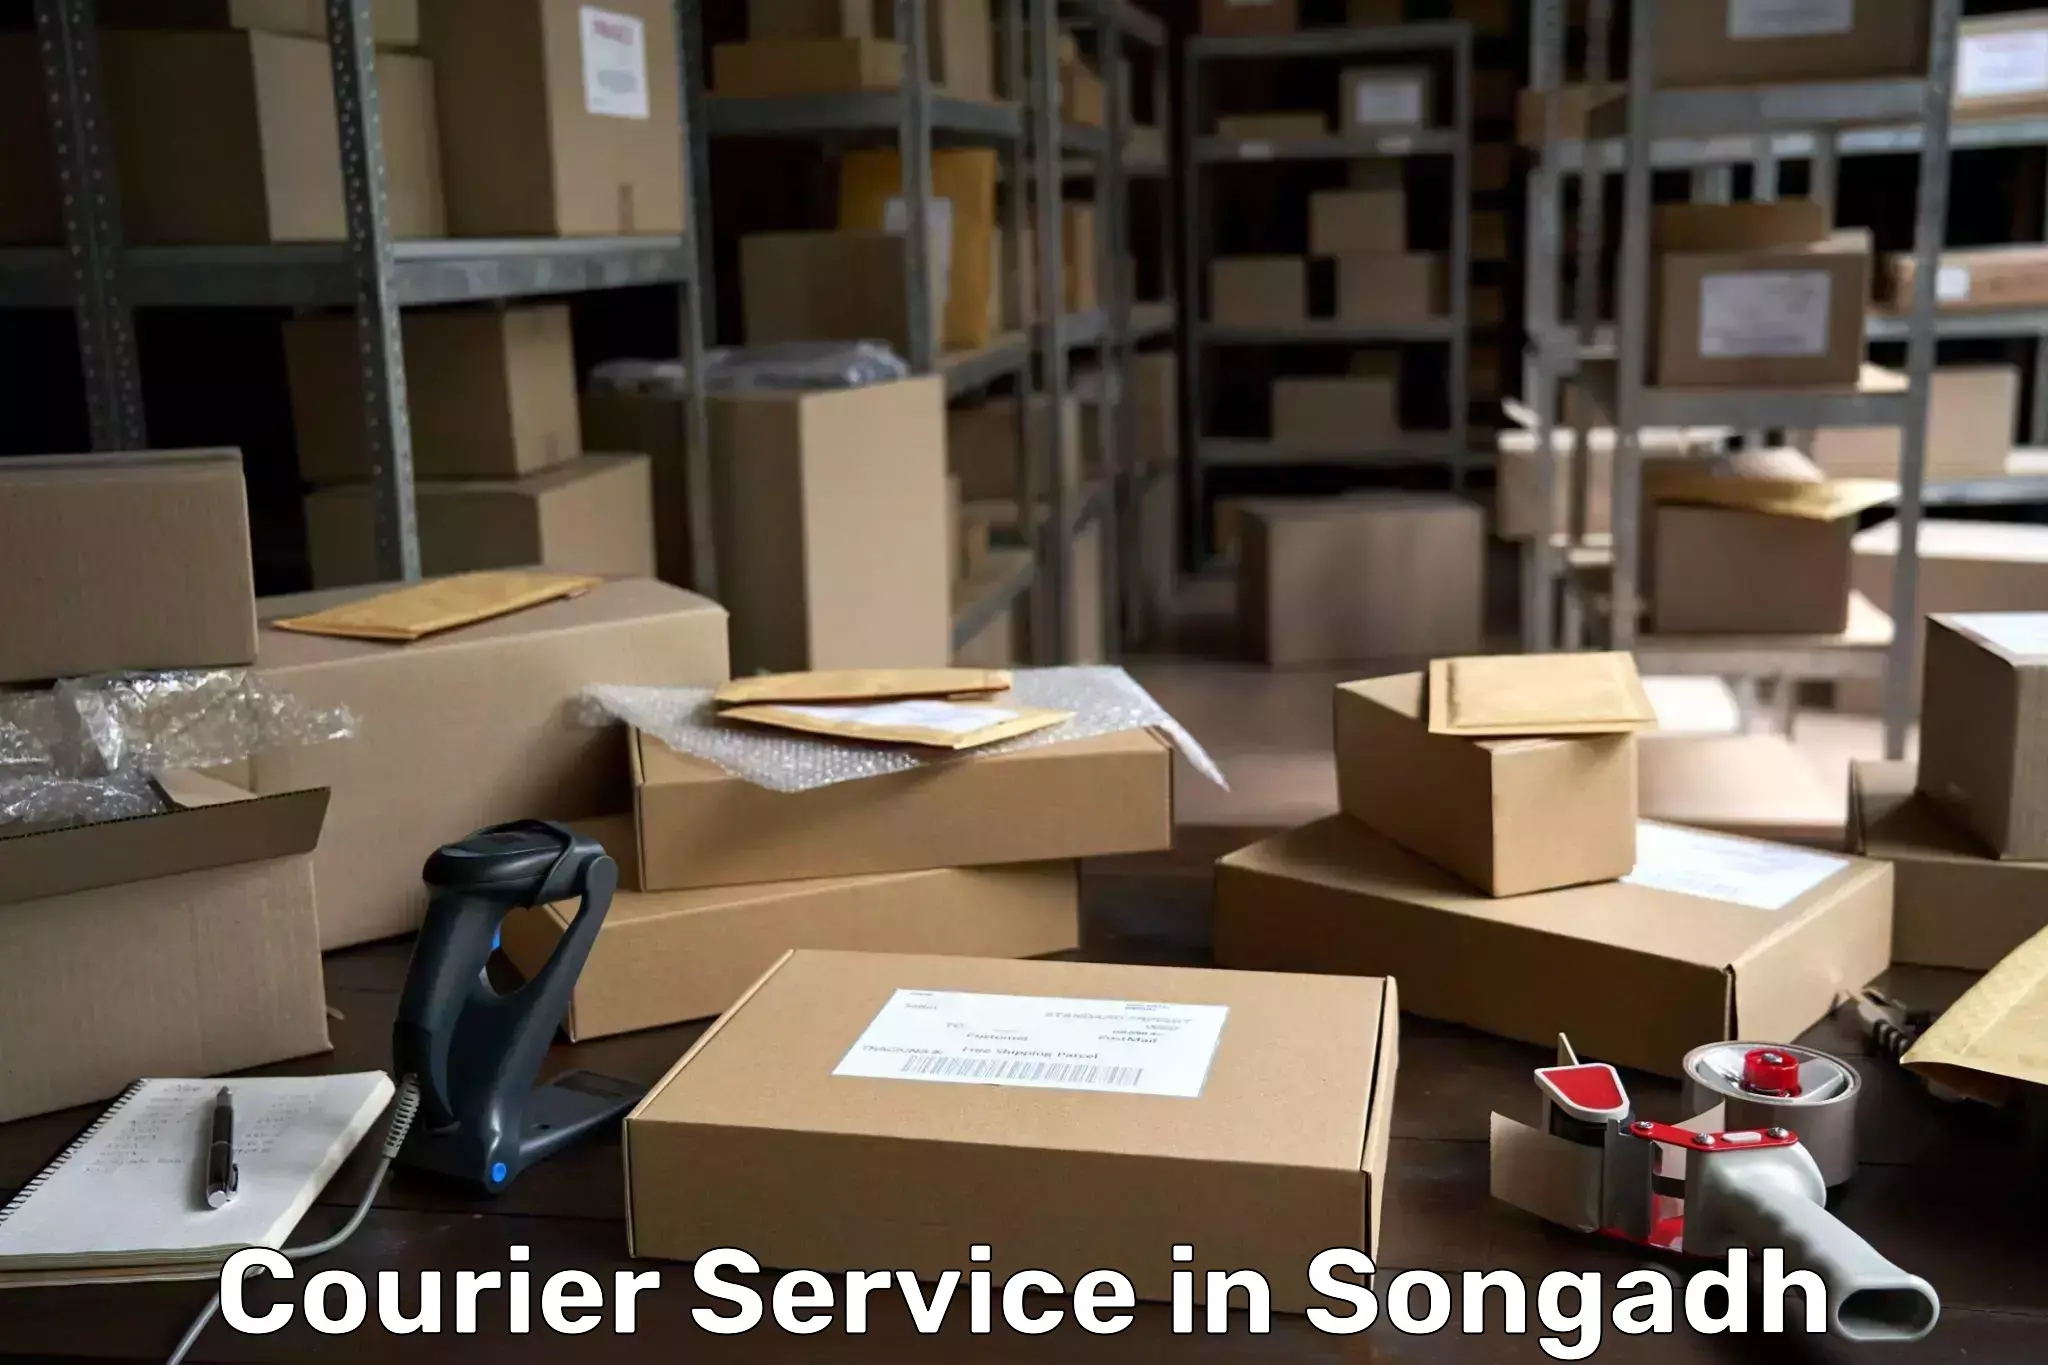 Modern delivery technologies in Songadh